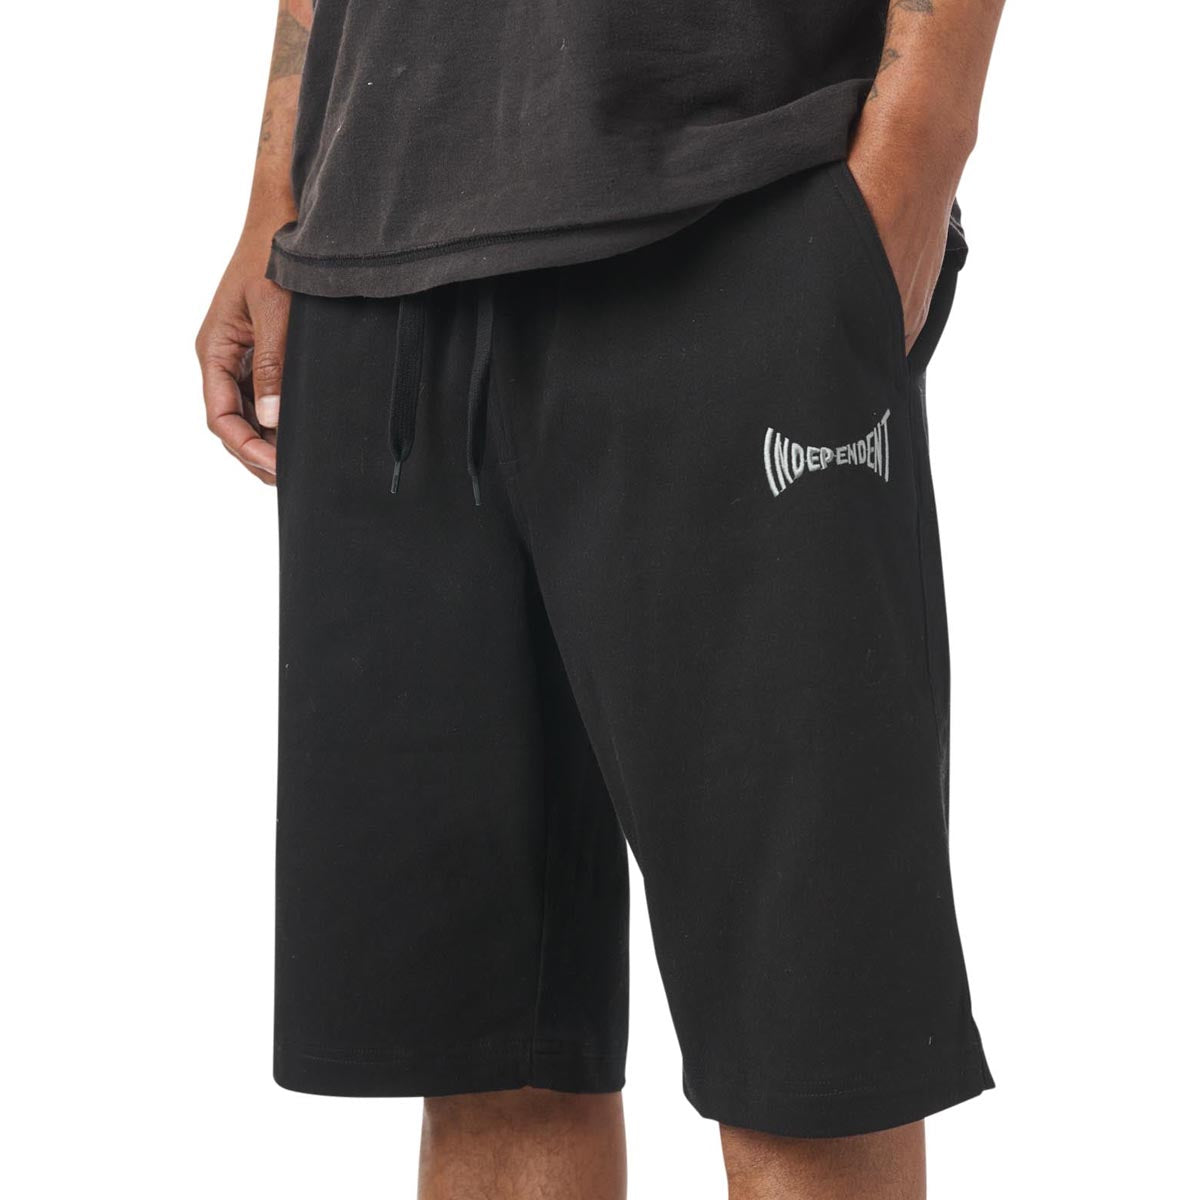 Independent Span Pull On Shorts - Black image 2